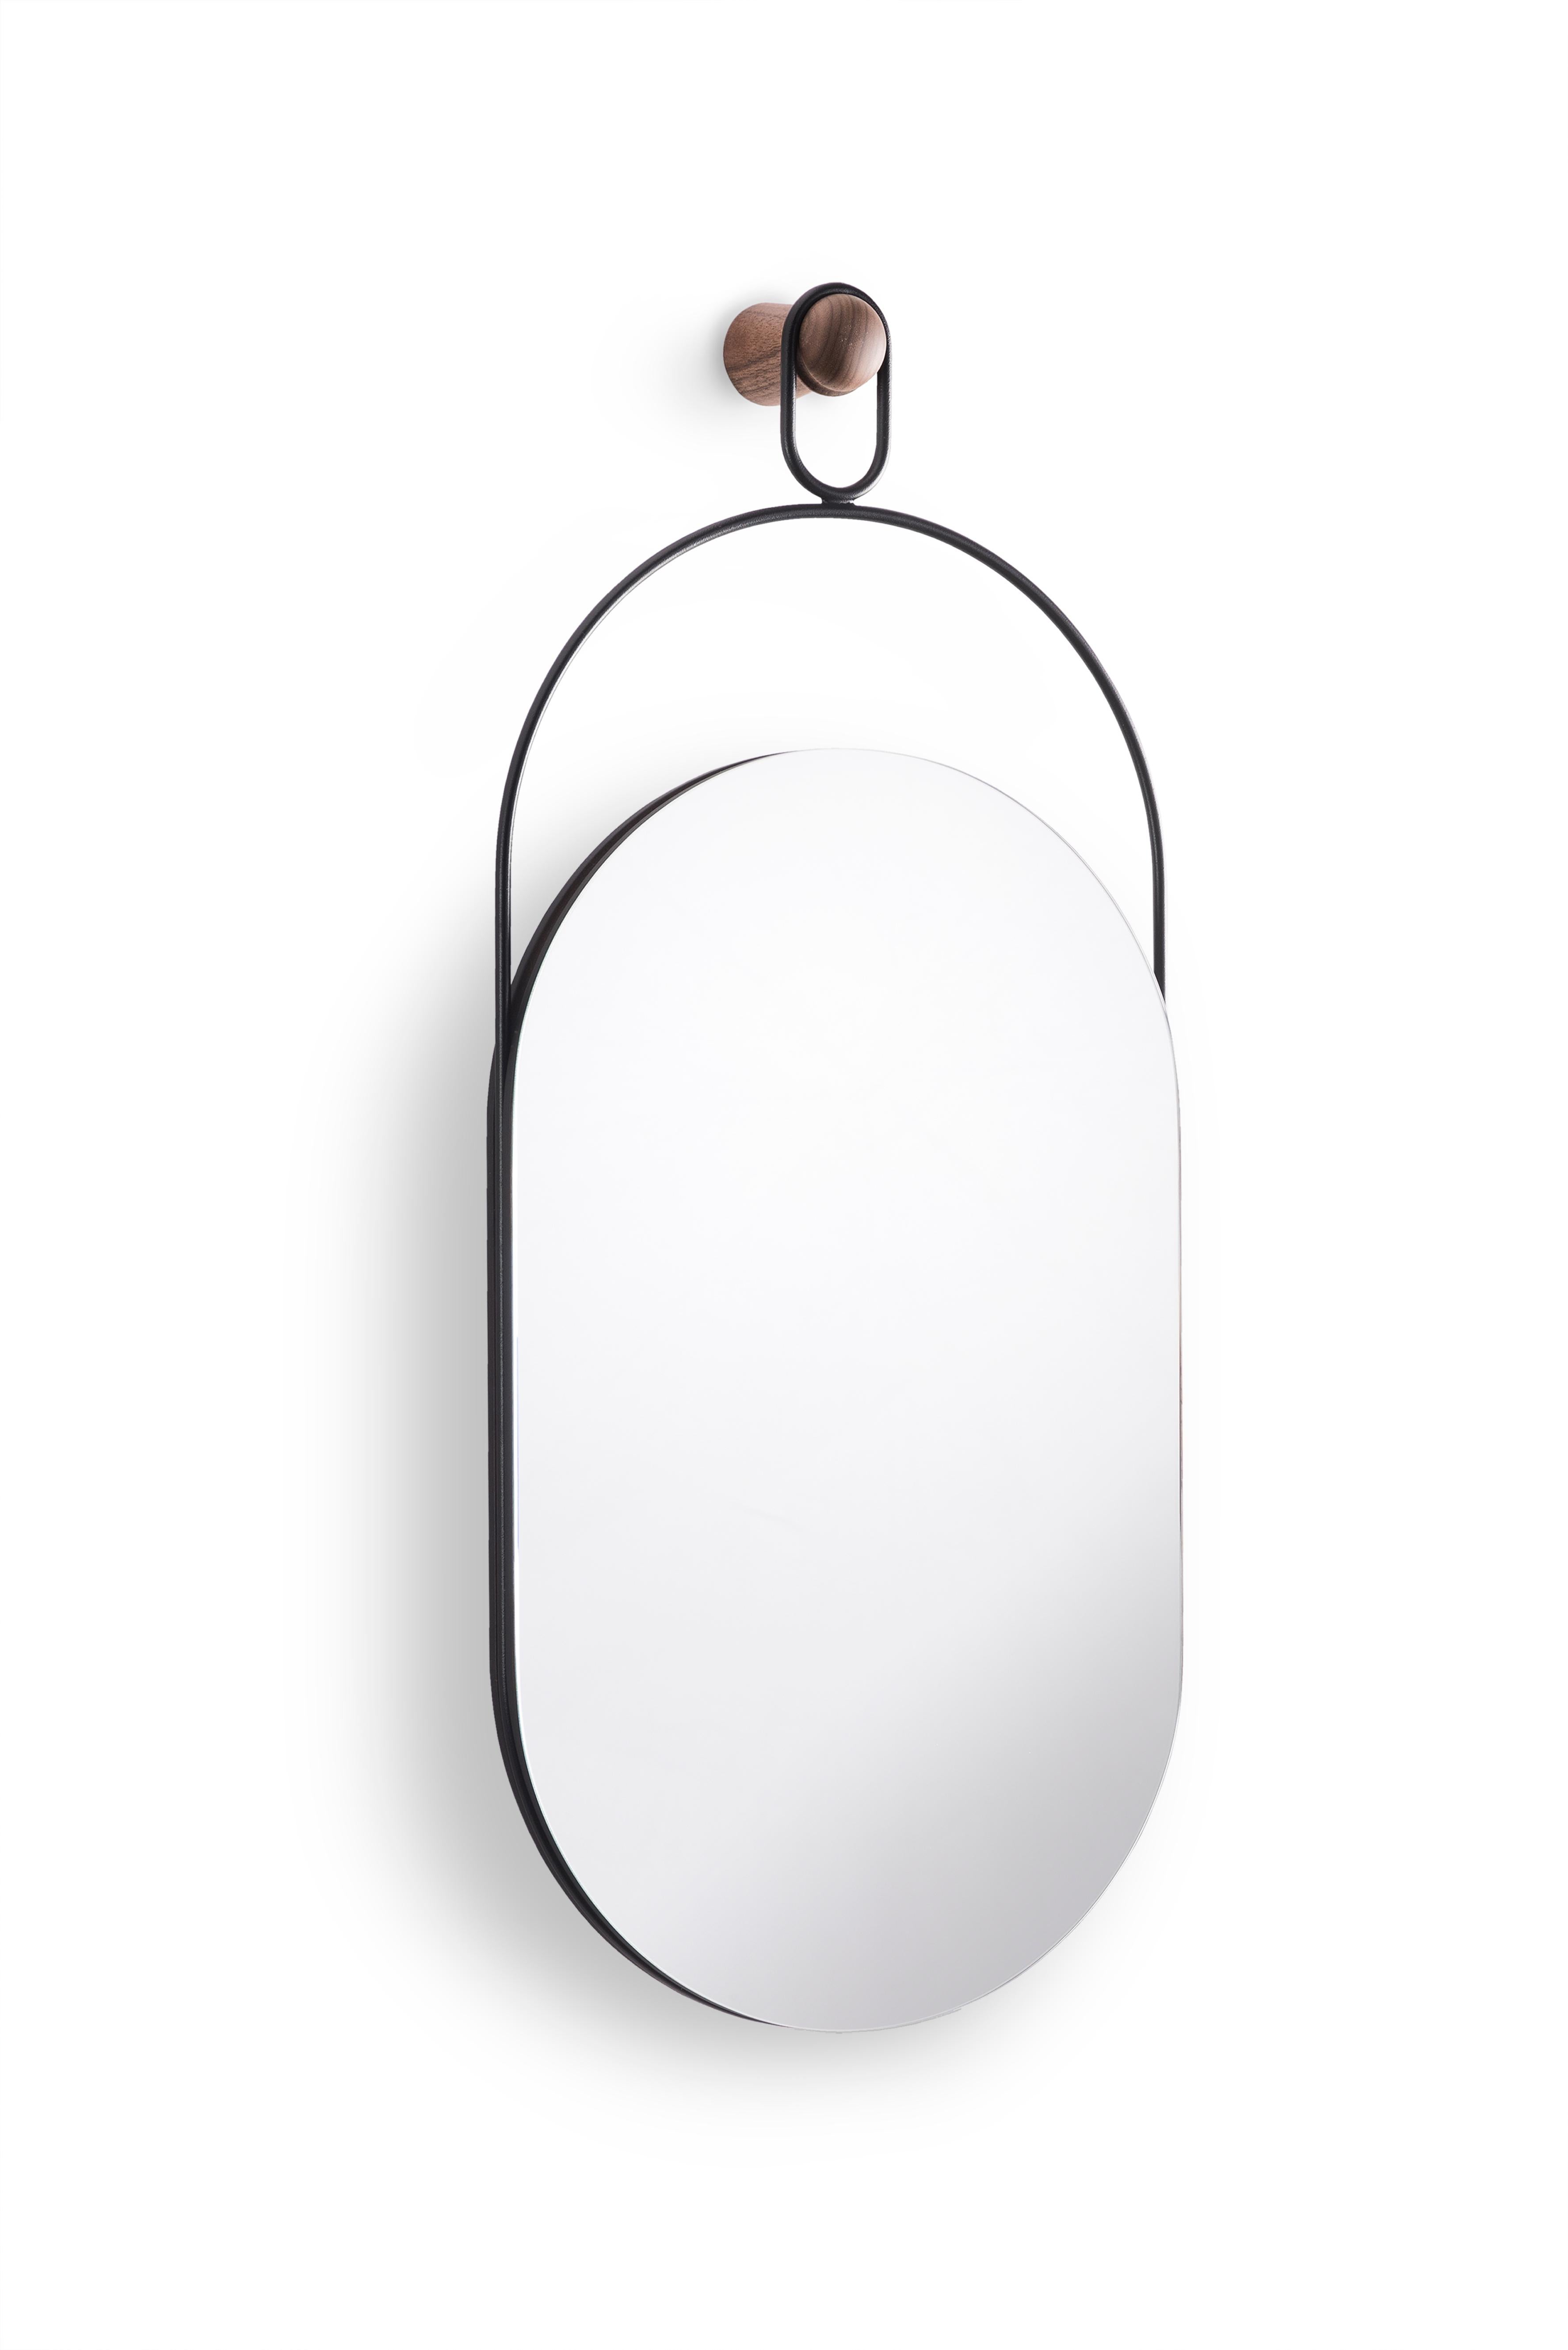 Sophisticated mirror, inspired in jewelry design. 

Available in Walnut and Black